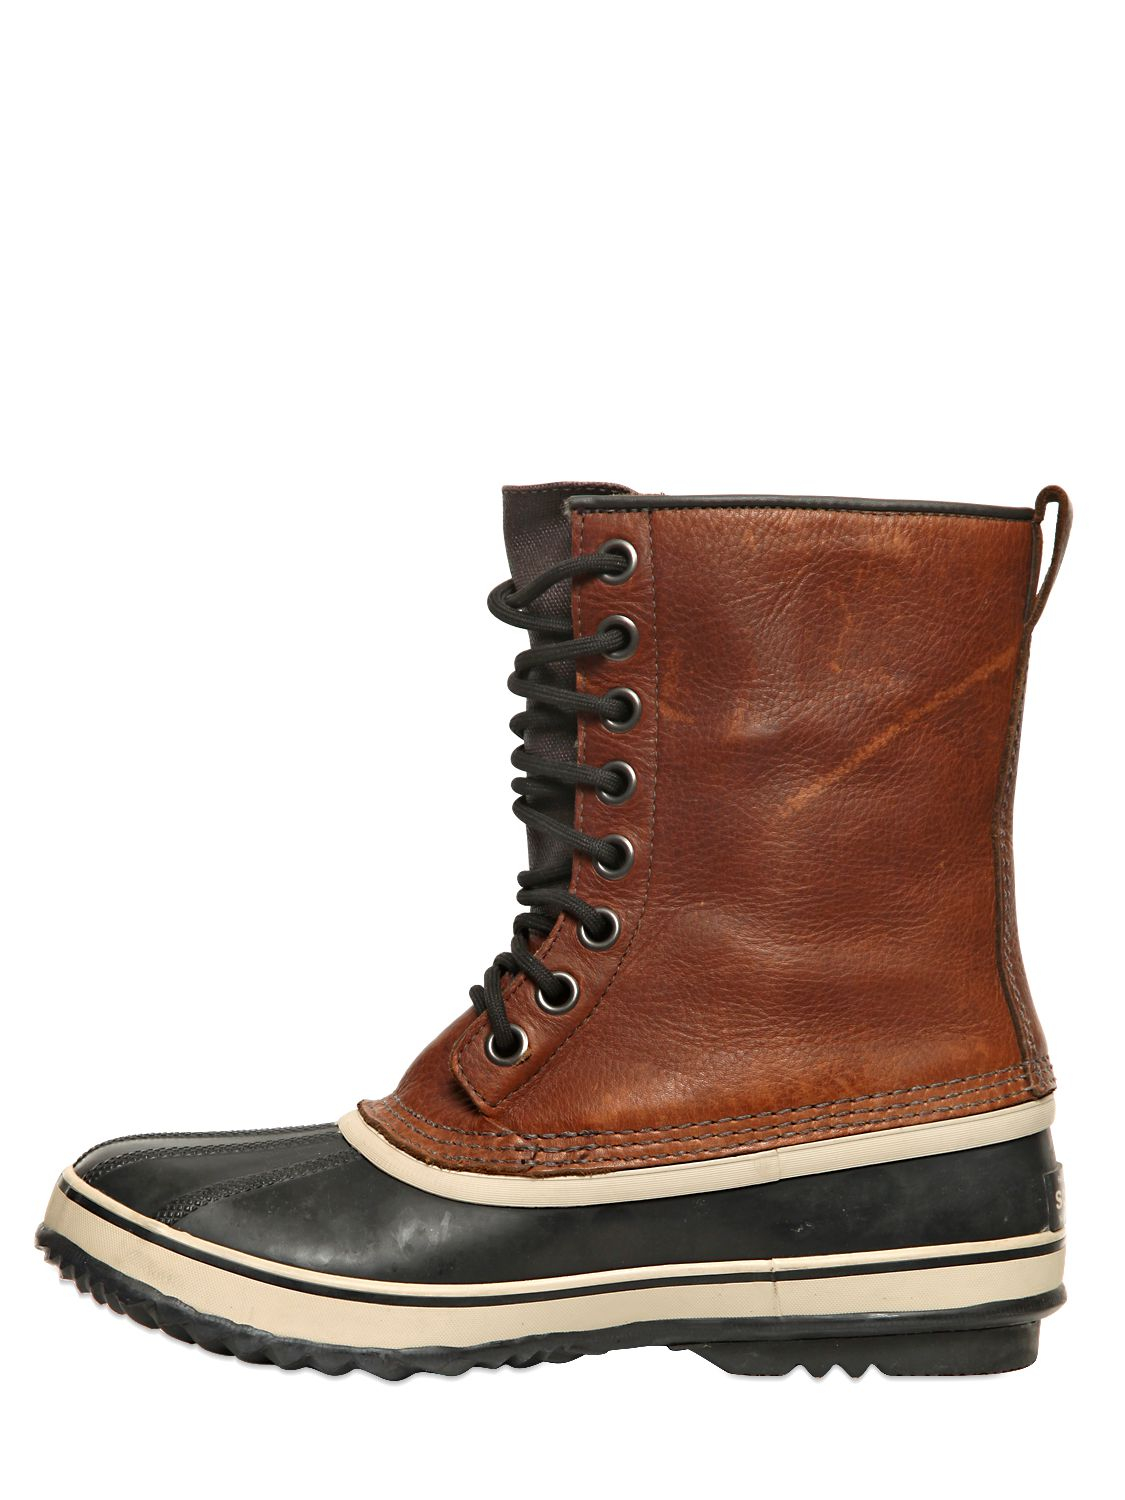 sorel-brown-1964-premium-t-leather-boots-product-1-21916331-1-473533412-normal.jpeg